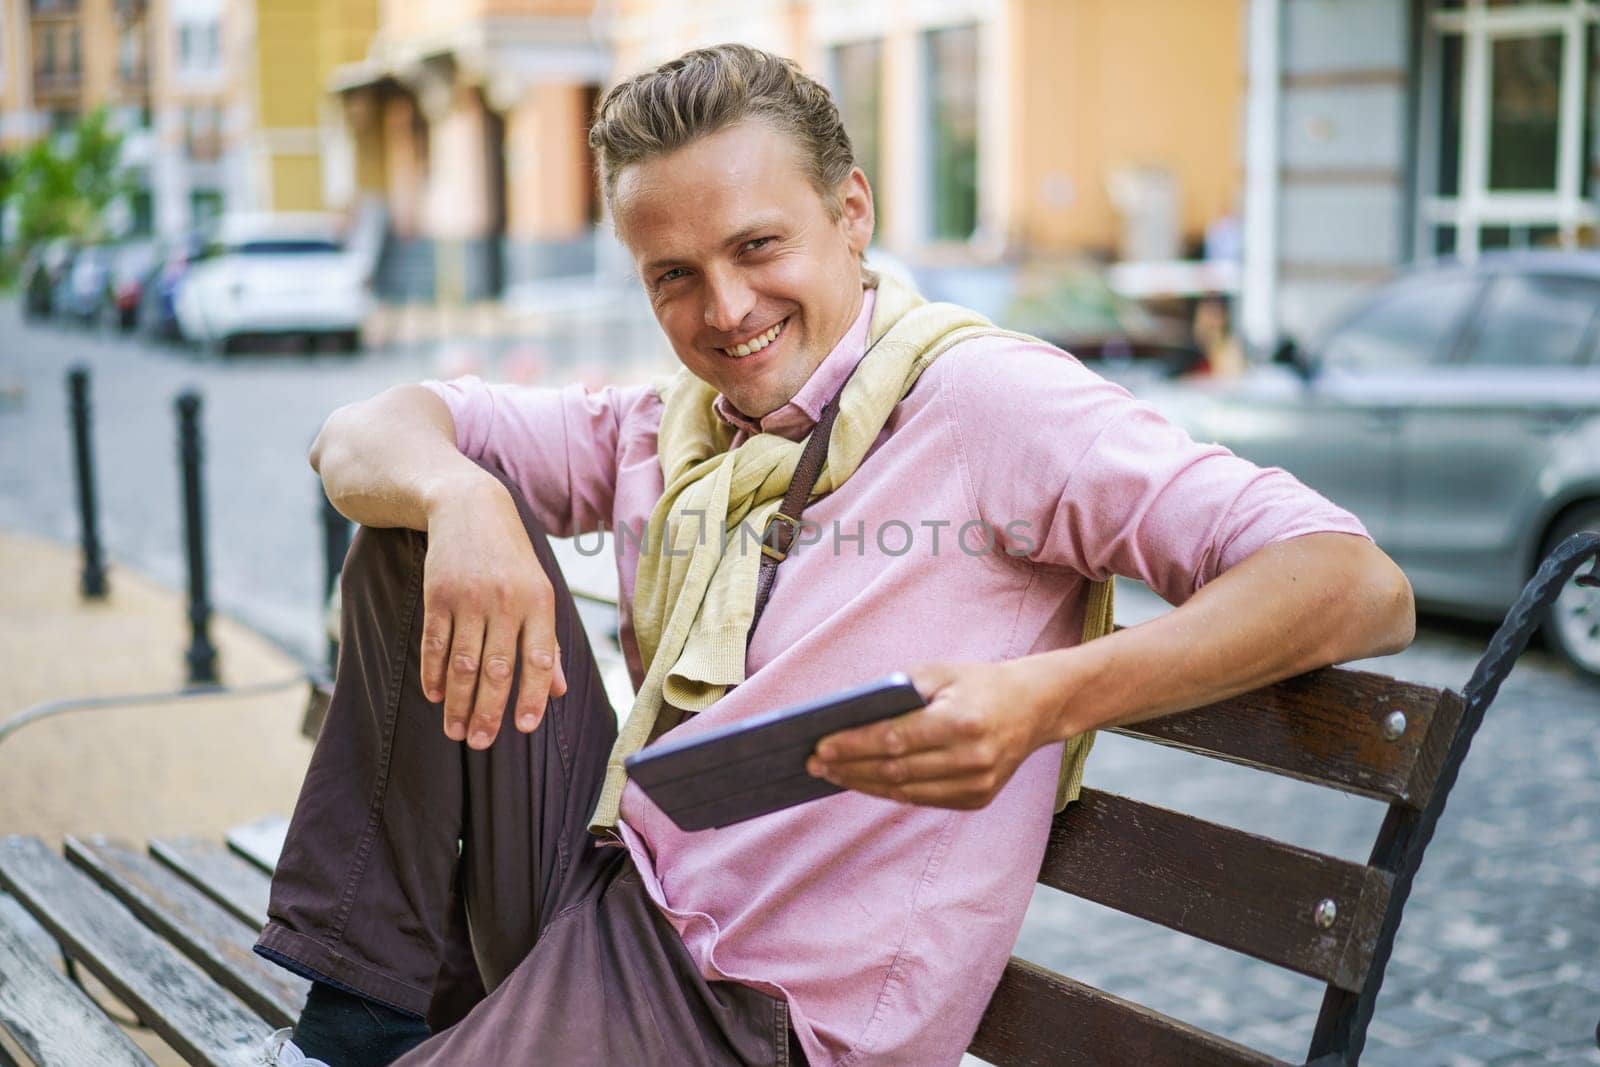 Smiling man sitting on bench in city, and using tablet PC. With gadget in hand, he effortlessly stays connected to digital world, browsing internet, engaging social media, or accessing various digital content. . High quality photo